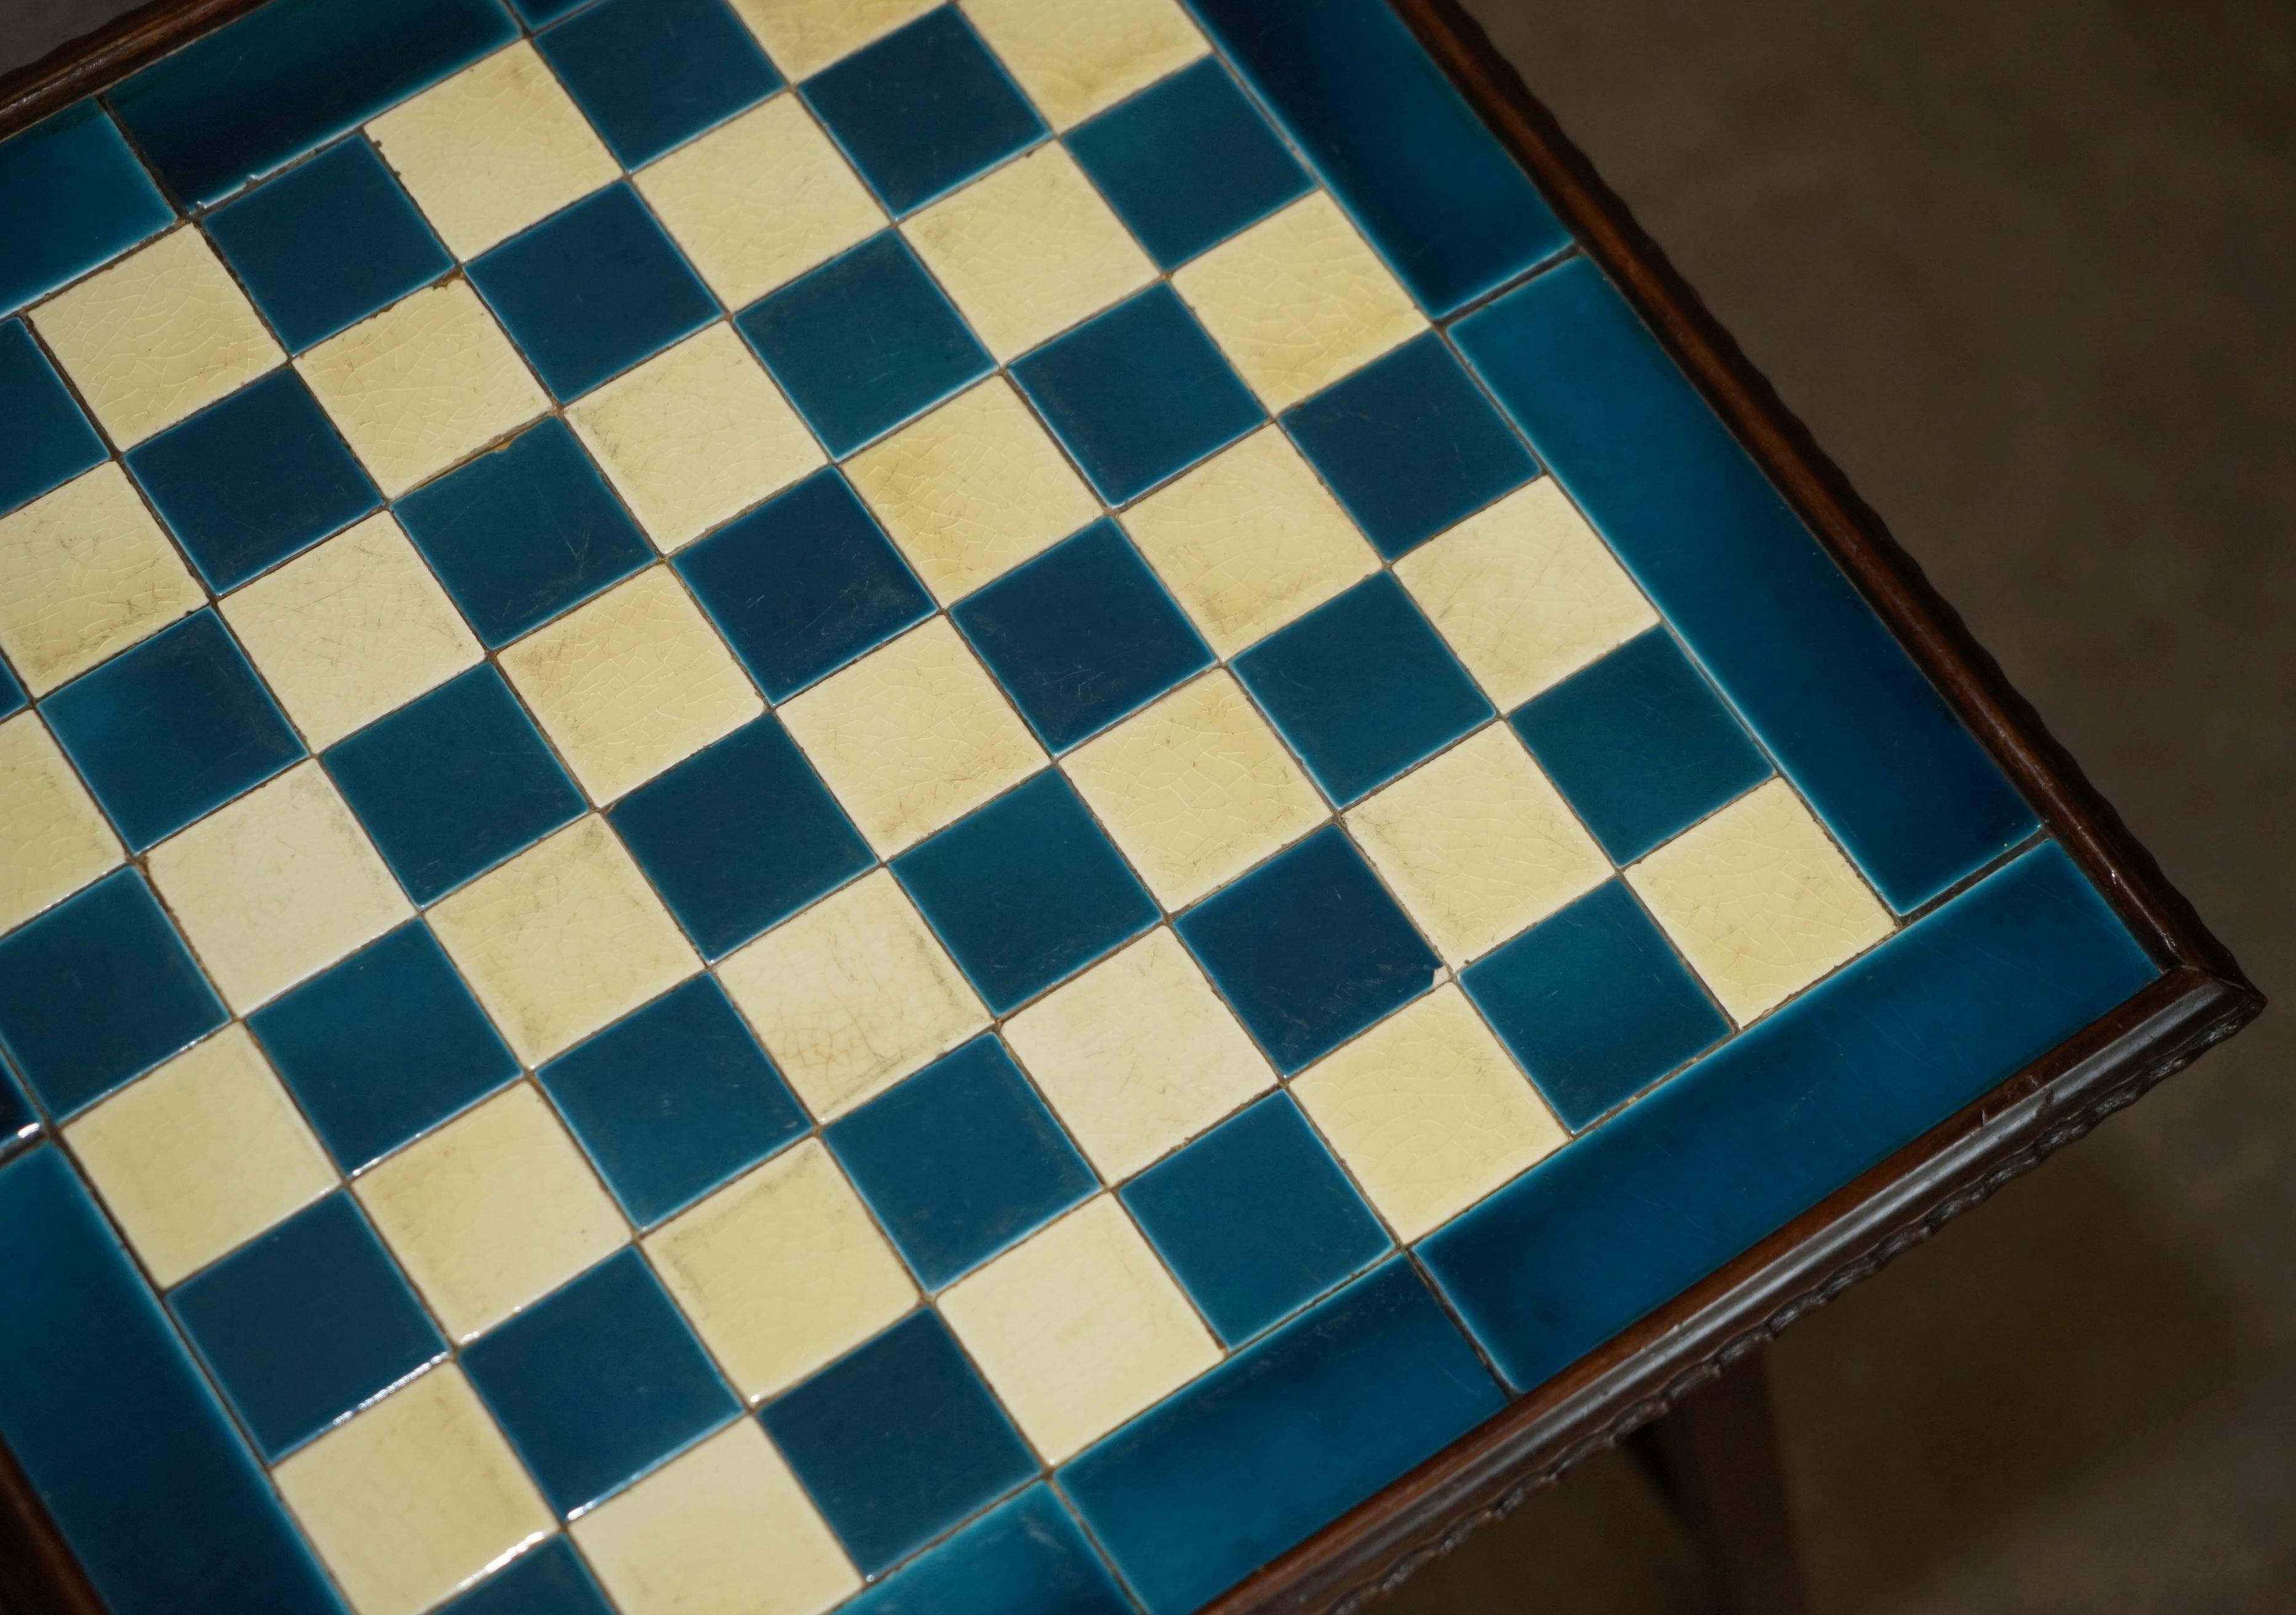 Late 19th Century ANTIQUE VICTORIAN AESTHETIC MOVEMENT STYLE TiLED TOP CHESSBOARD CHESS TABLE For Sale